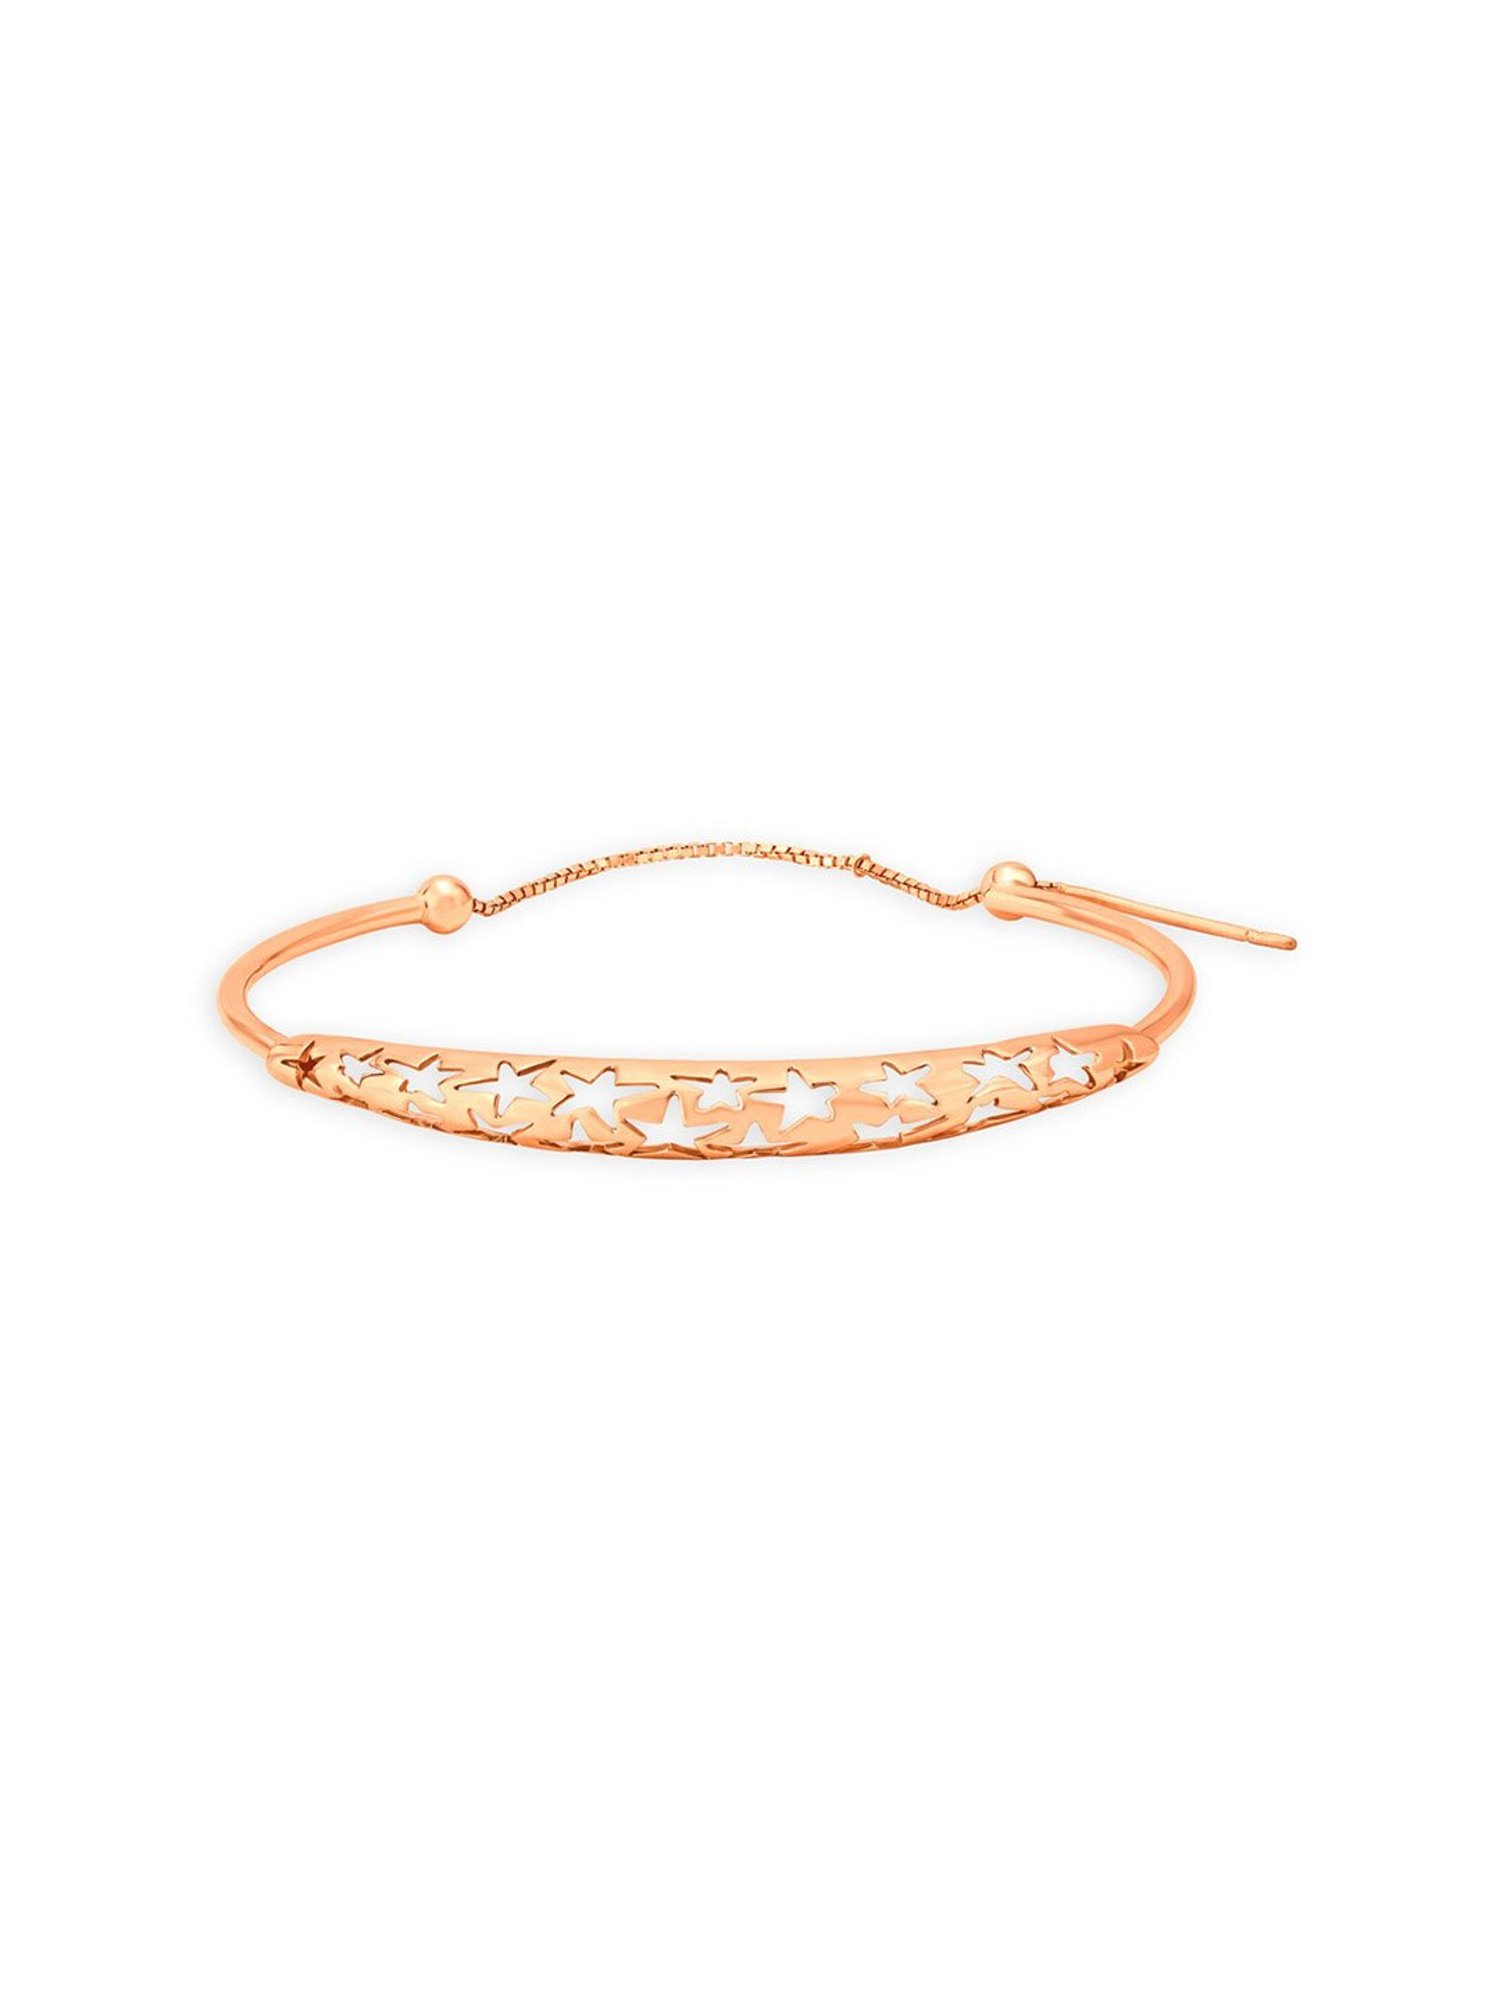 22k Gold Bracelet from Tanishq  South India Jewels